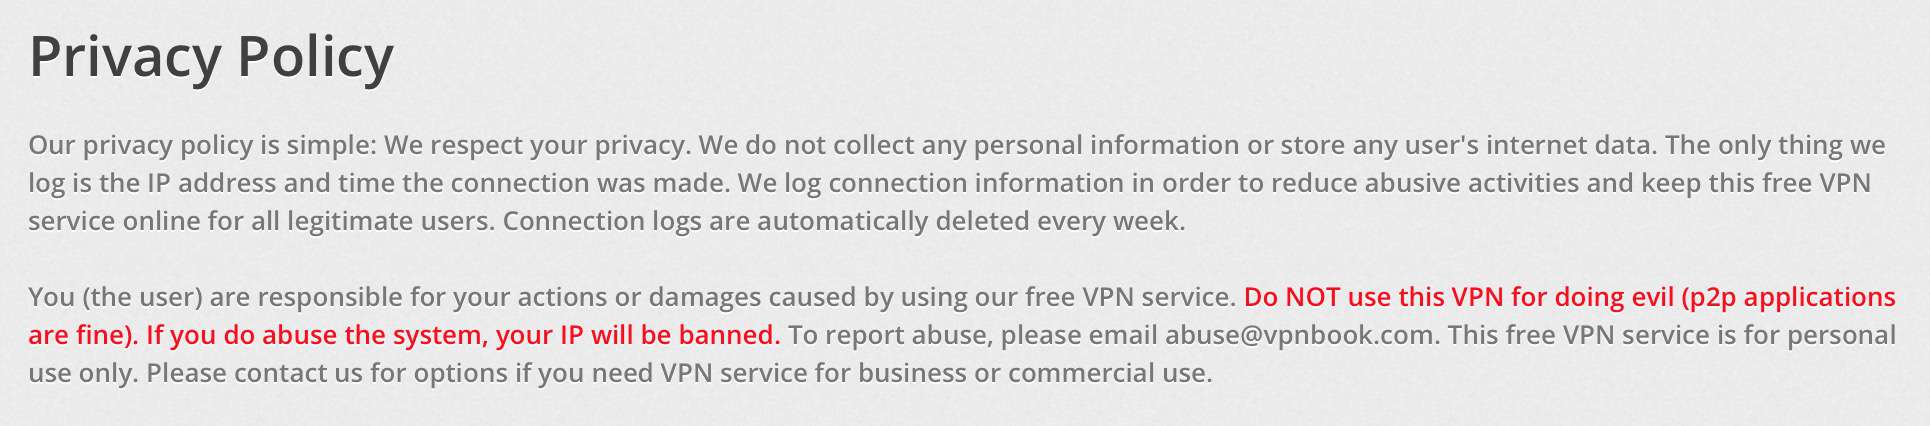 VPNBook - Privacy Policy